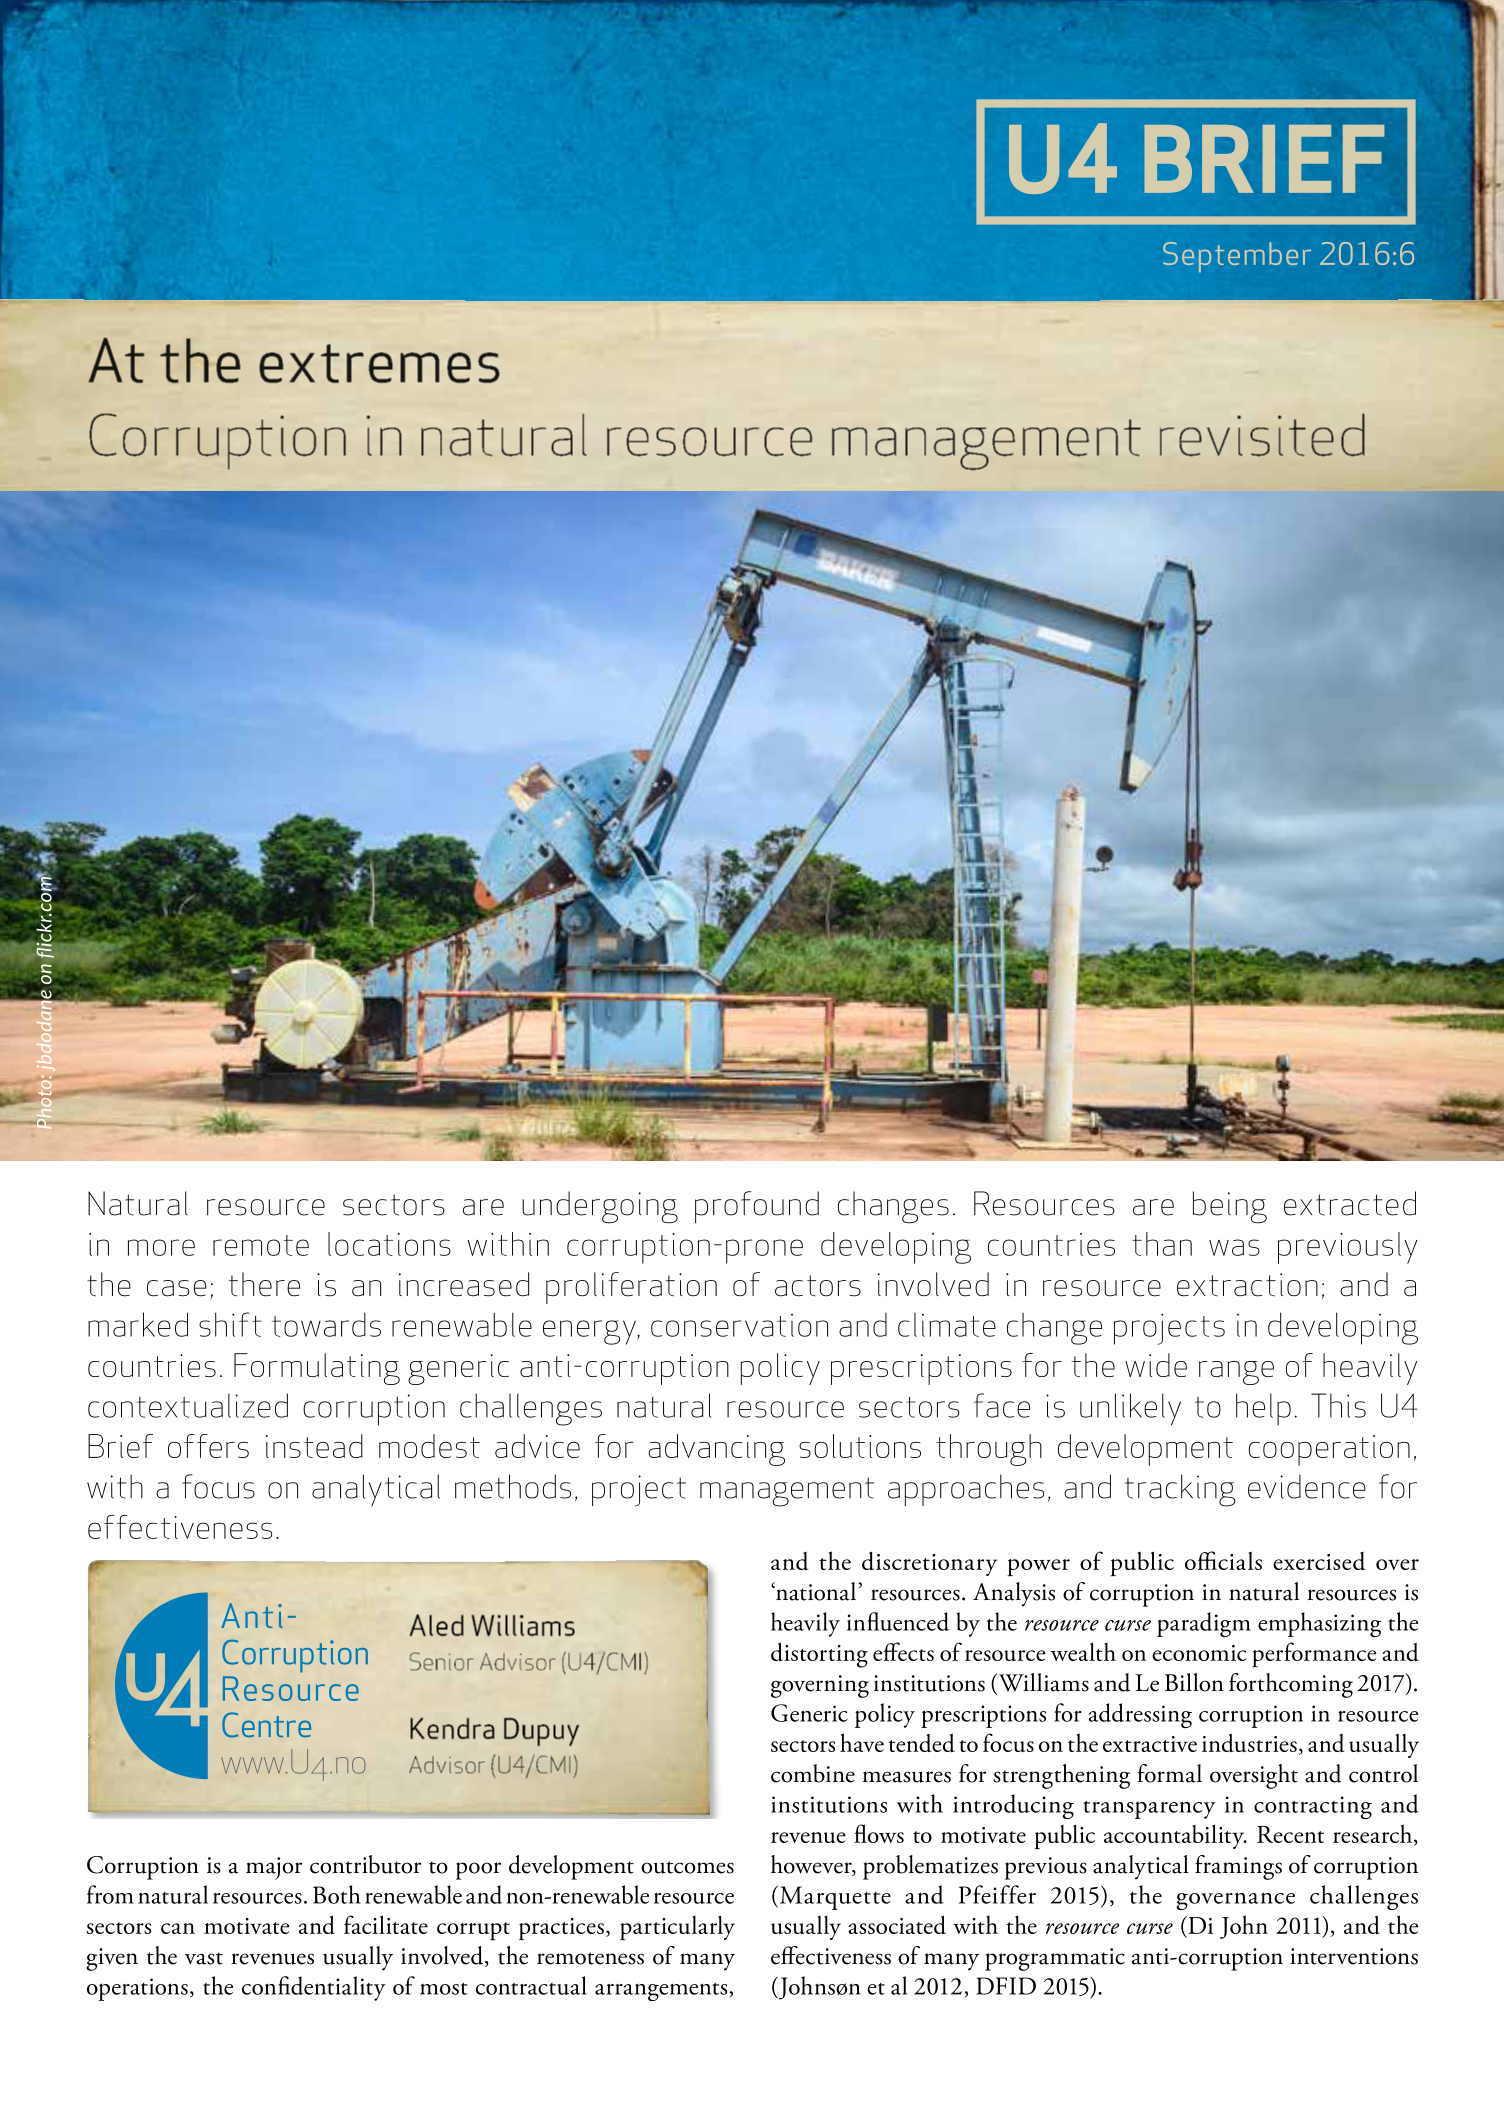 At the extremes: Corruption in natural resource management revisited